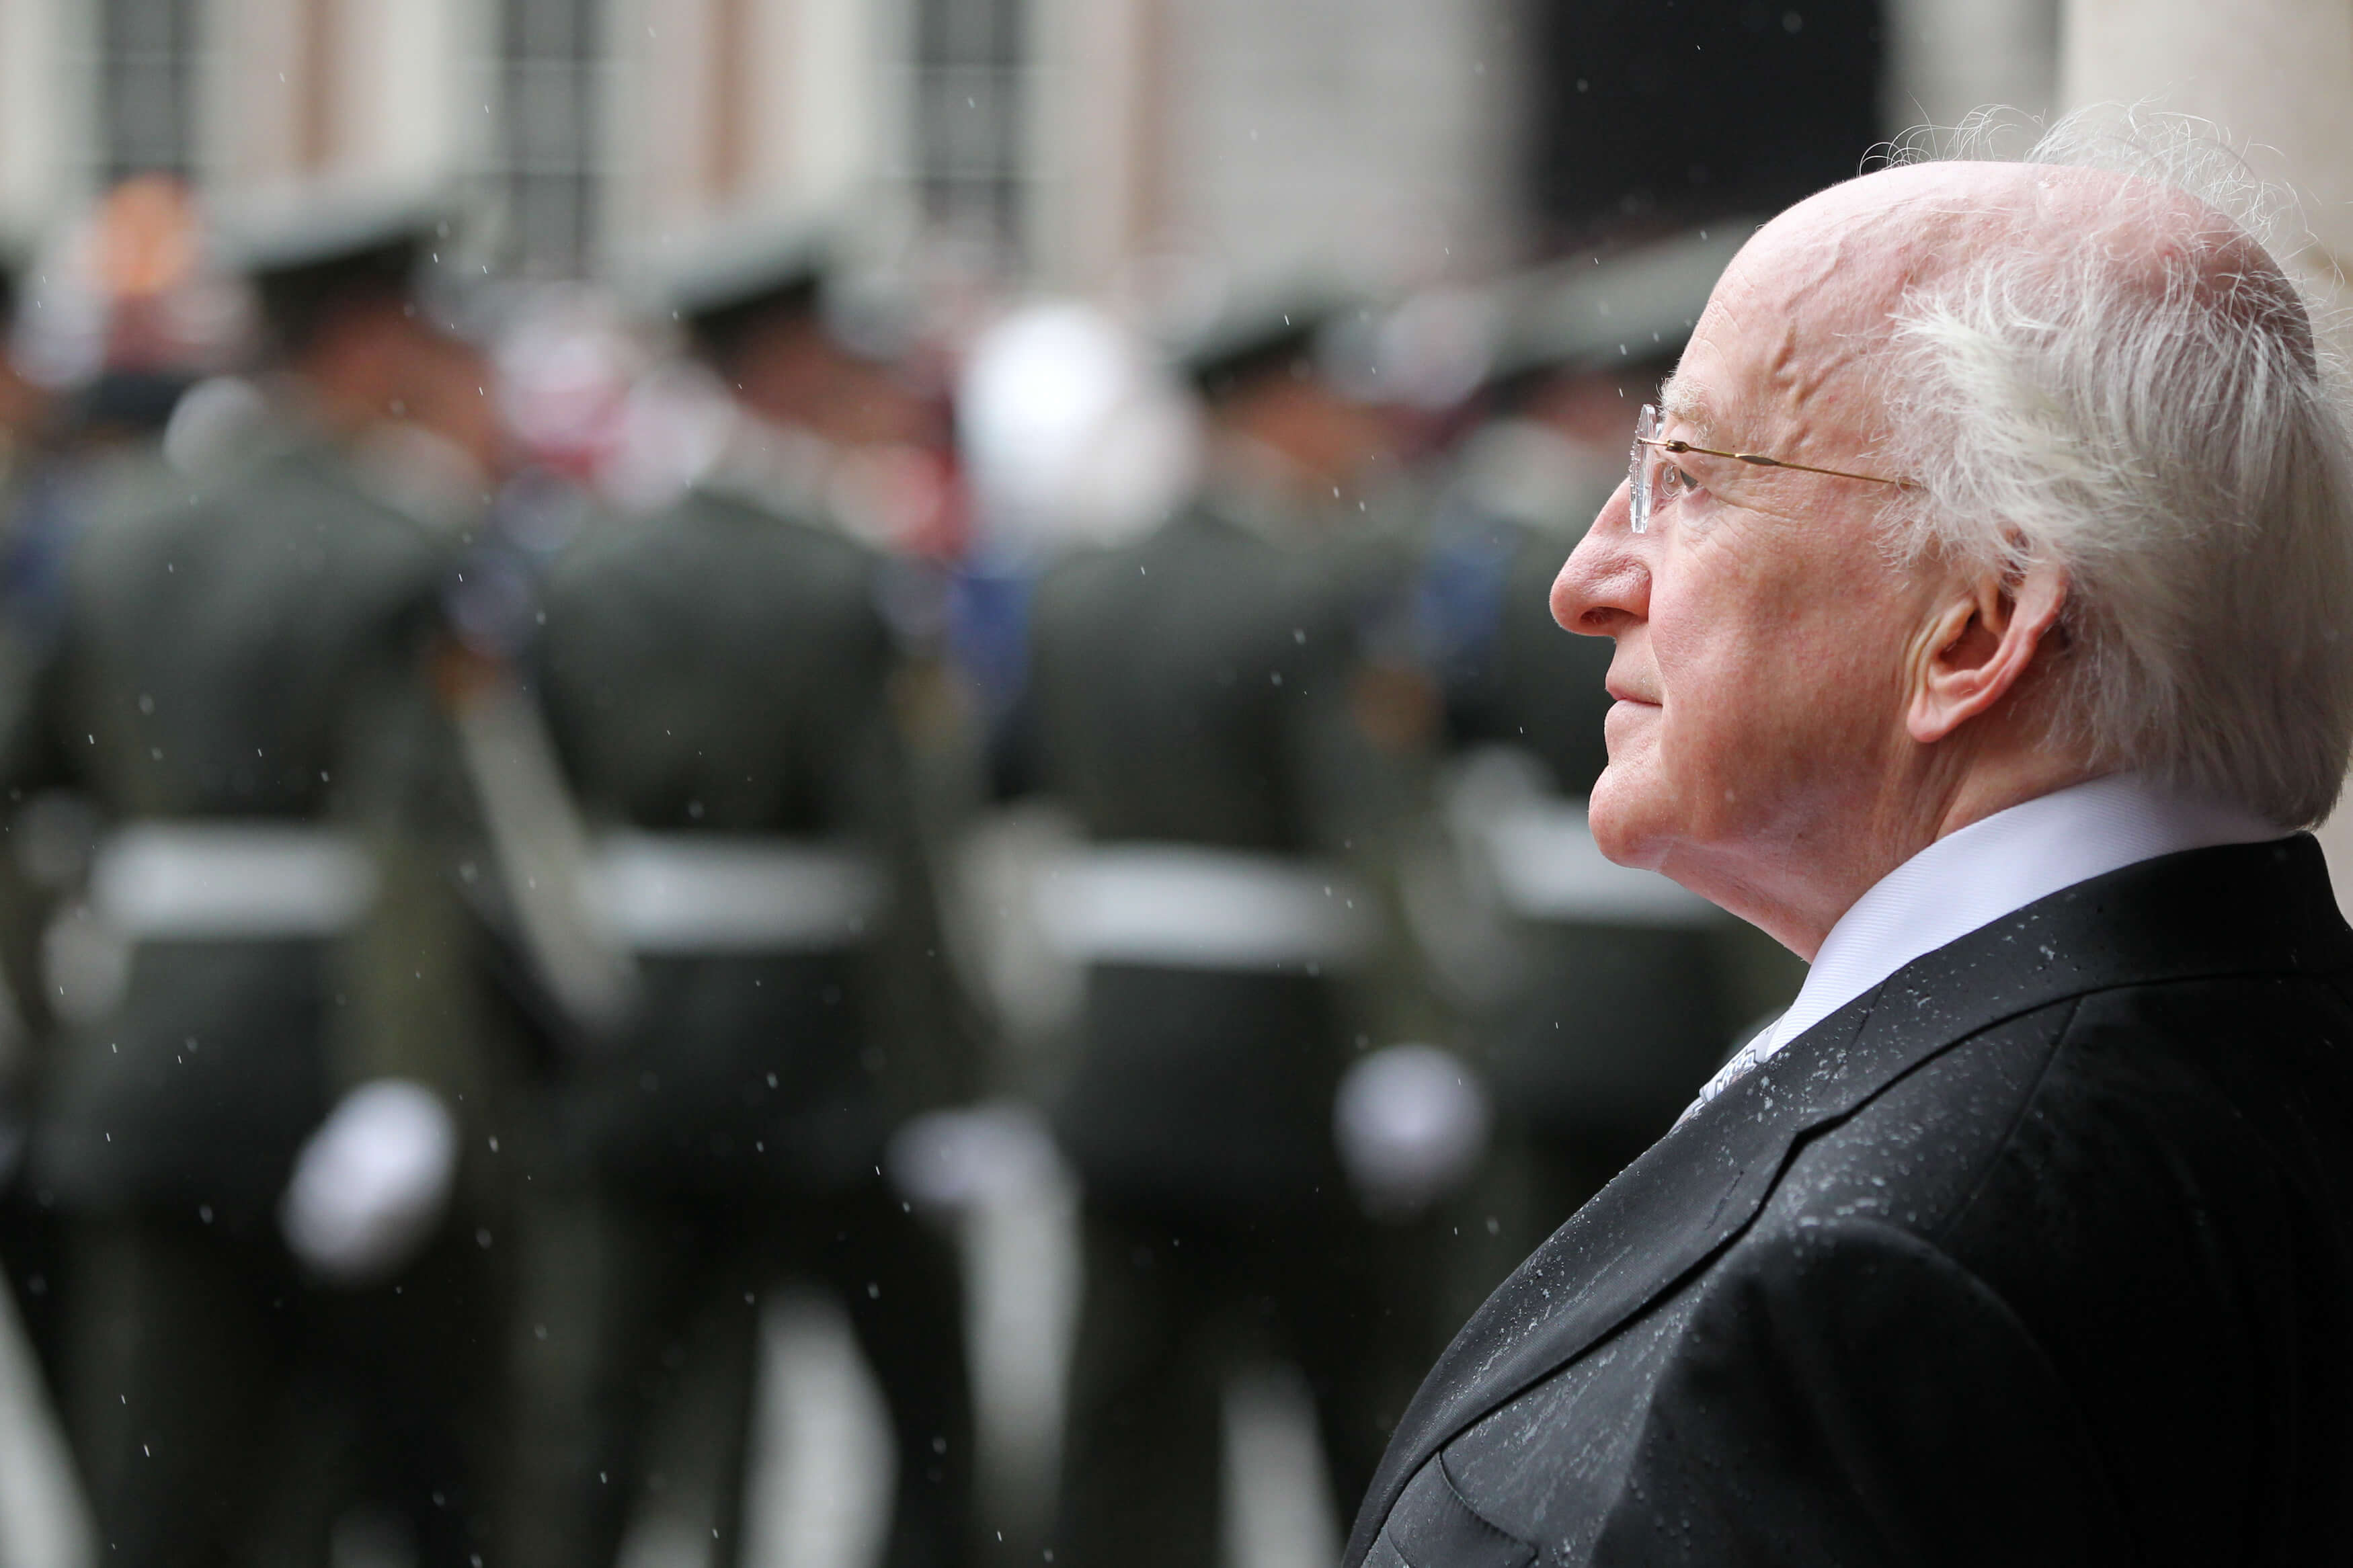 Michael D. Higgins is the 9th President of Ireland